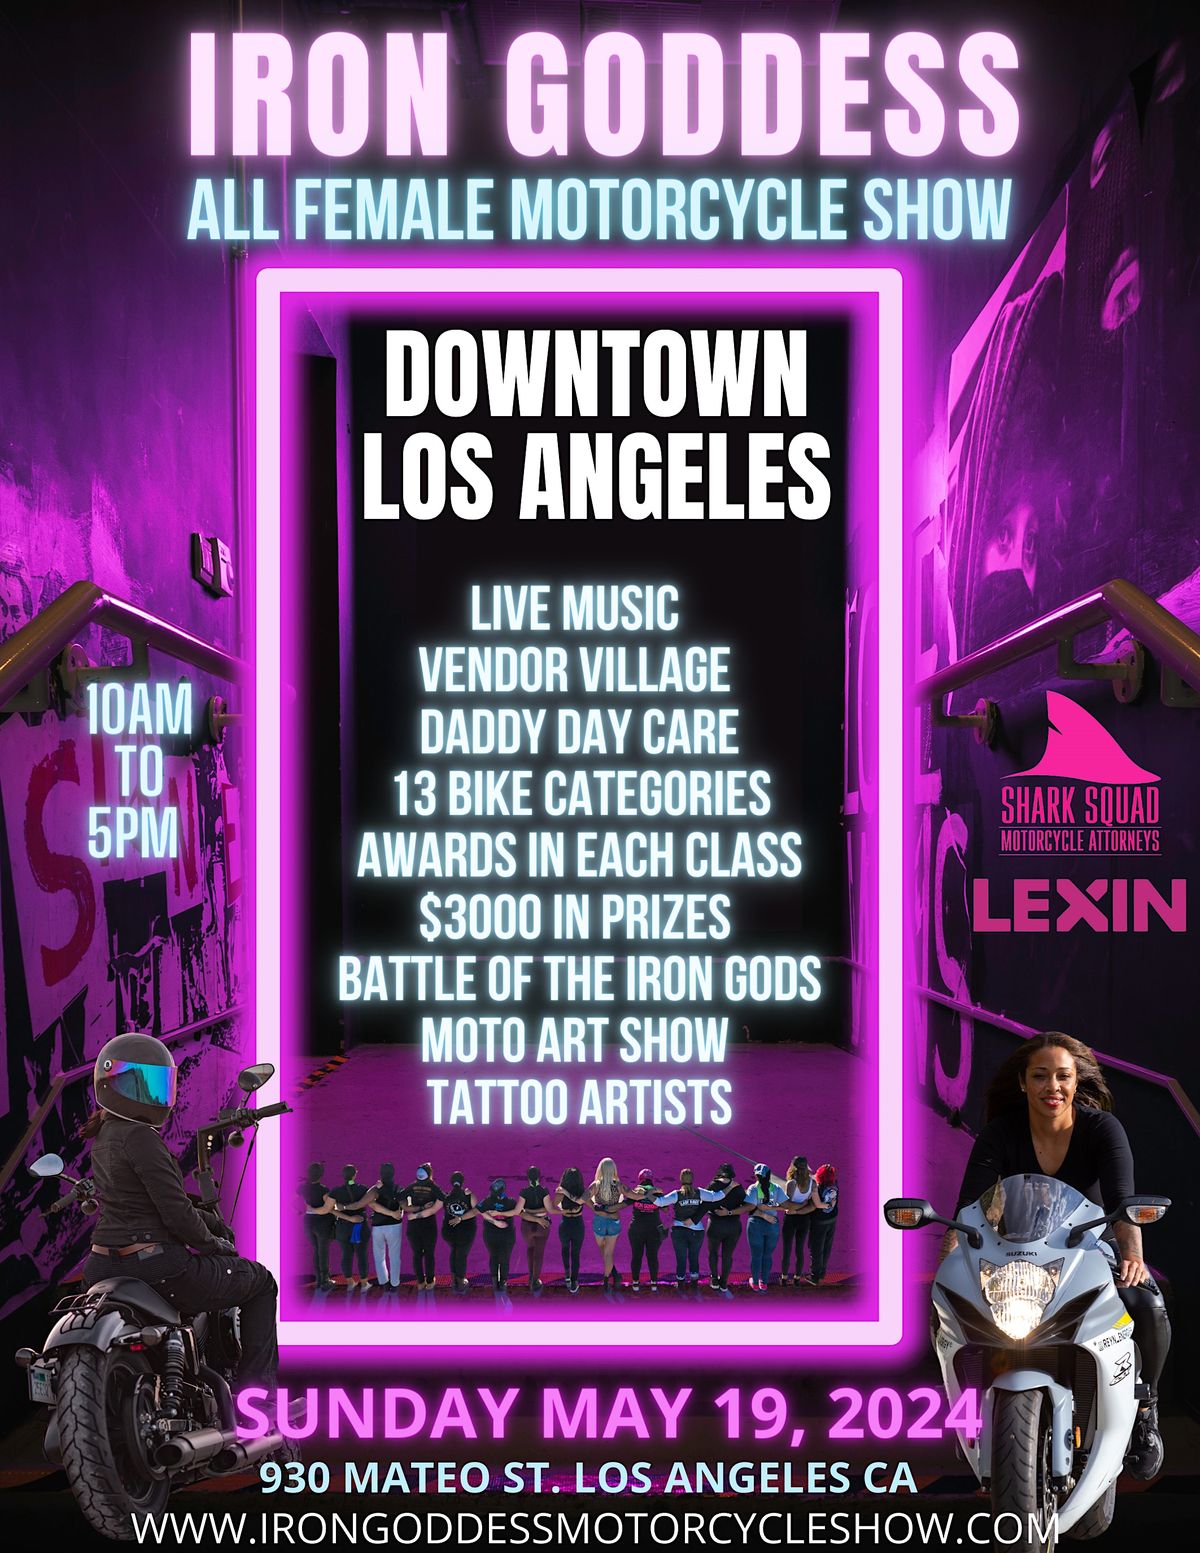 IRON GODDESS MOTORCYCLE SHOW - LOS ANGELES